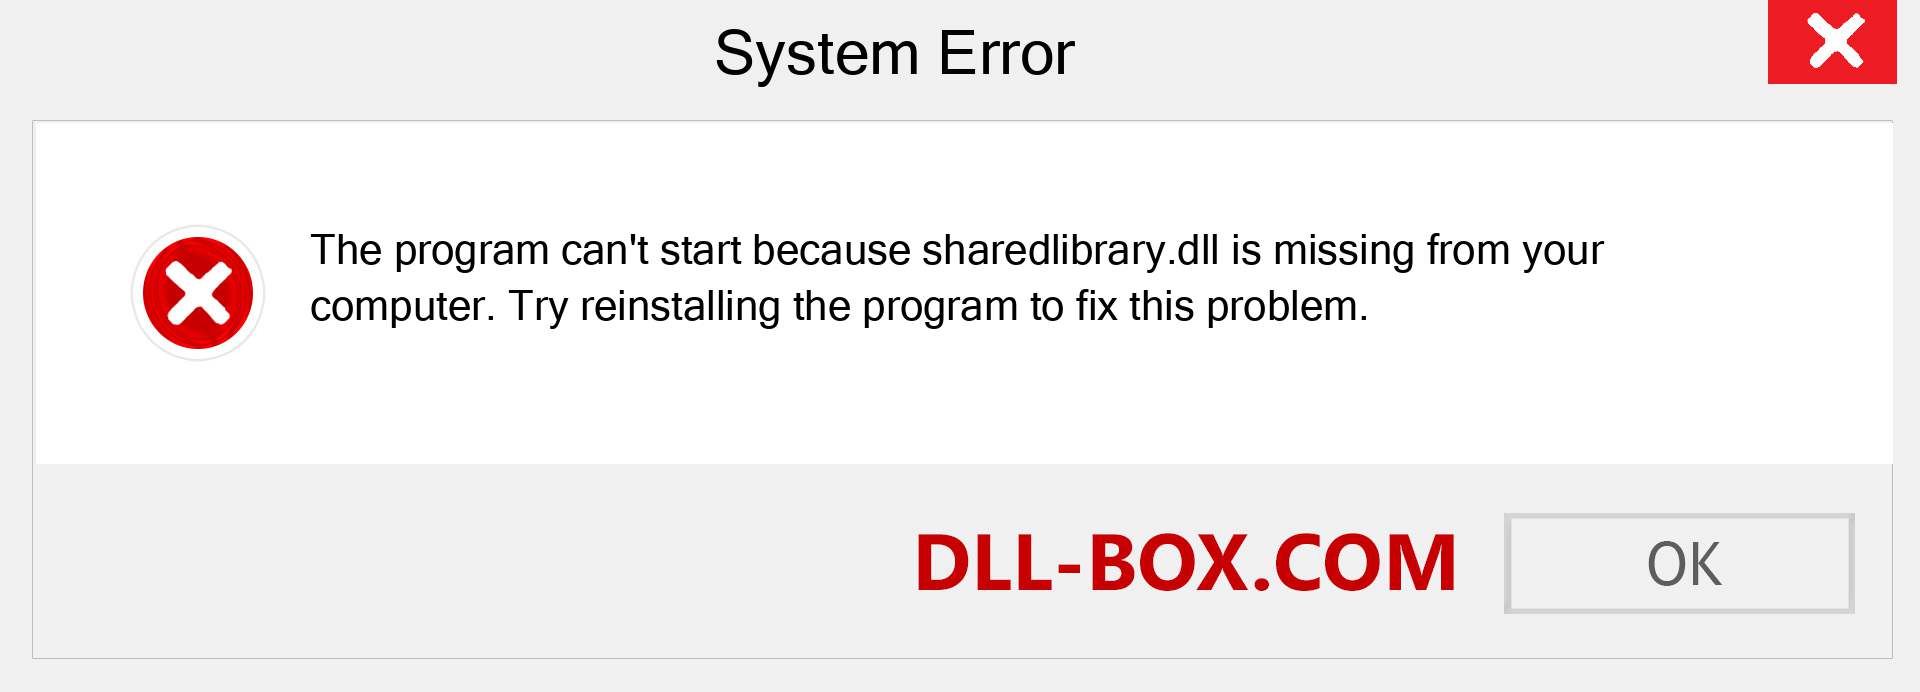  sharedlibrary.dll file is missing?. Download for Windows 7, 8, 10 - Fix  sharedlibrary dll Missing Error on Windows, photos, images